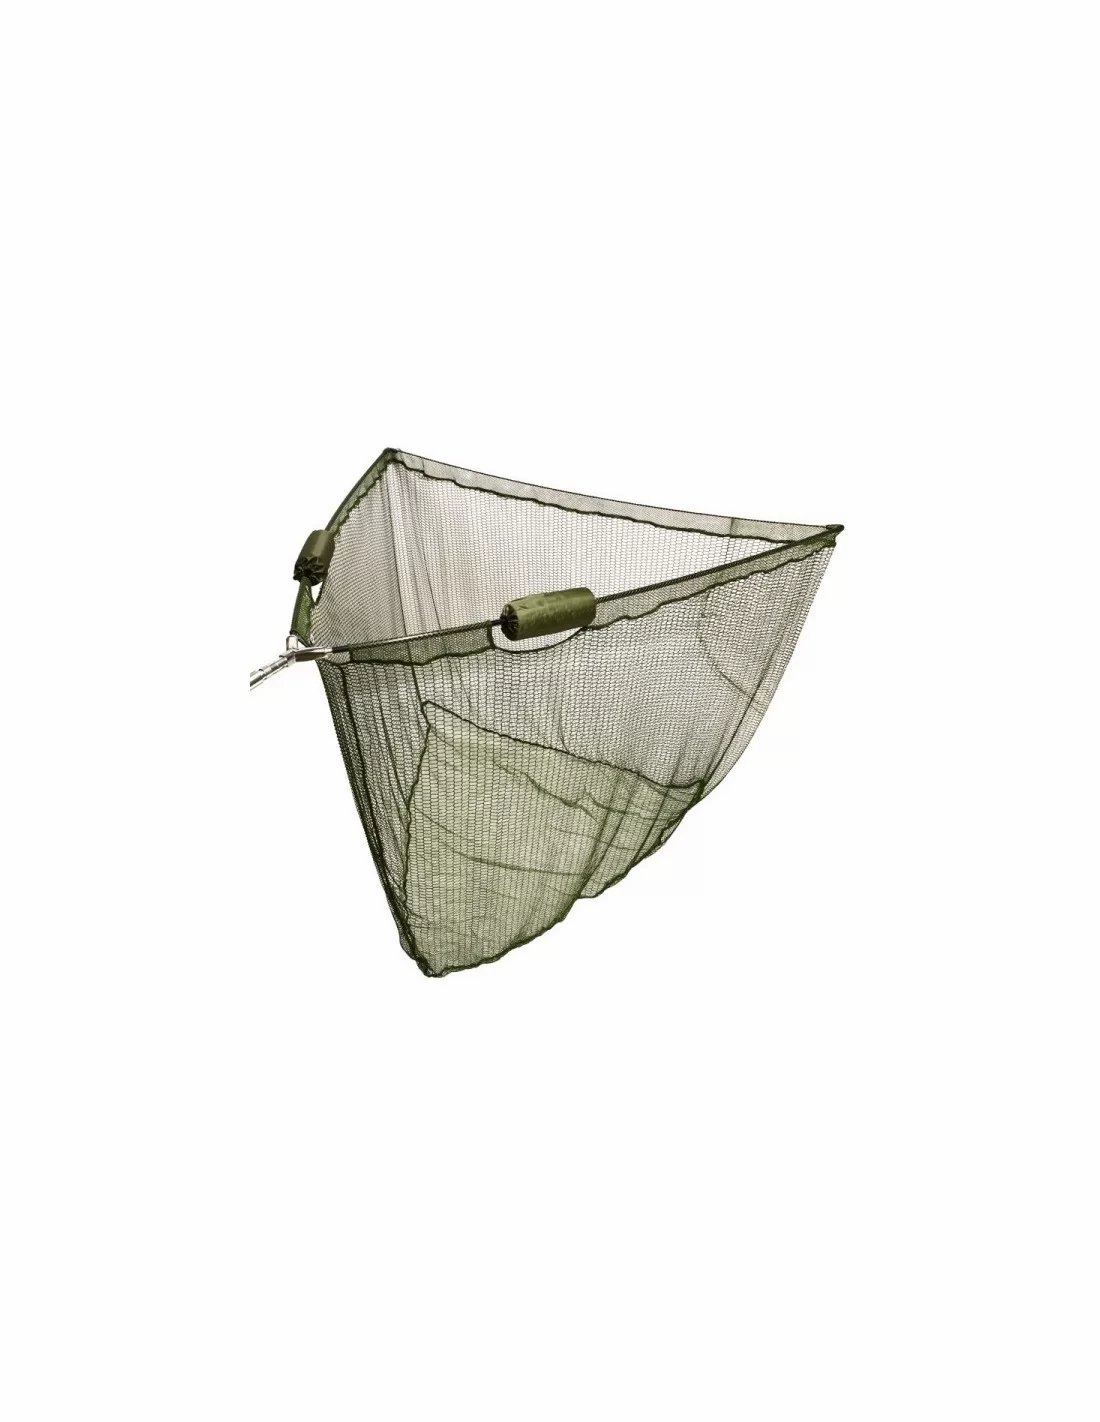 NGT 50" Green Specimen Net with Dual Net Float System (Metal Block) плуваща глава за кеп